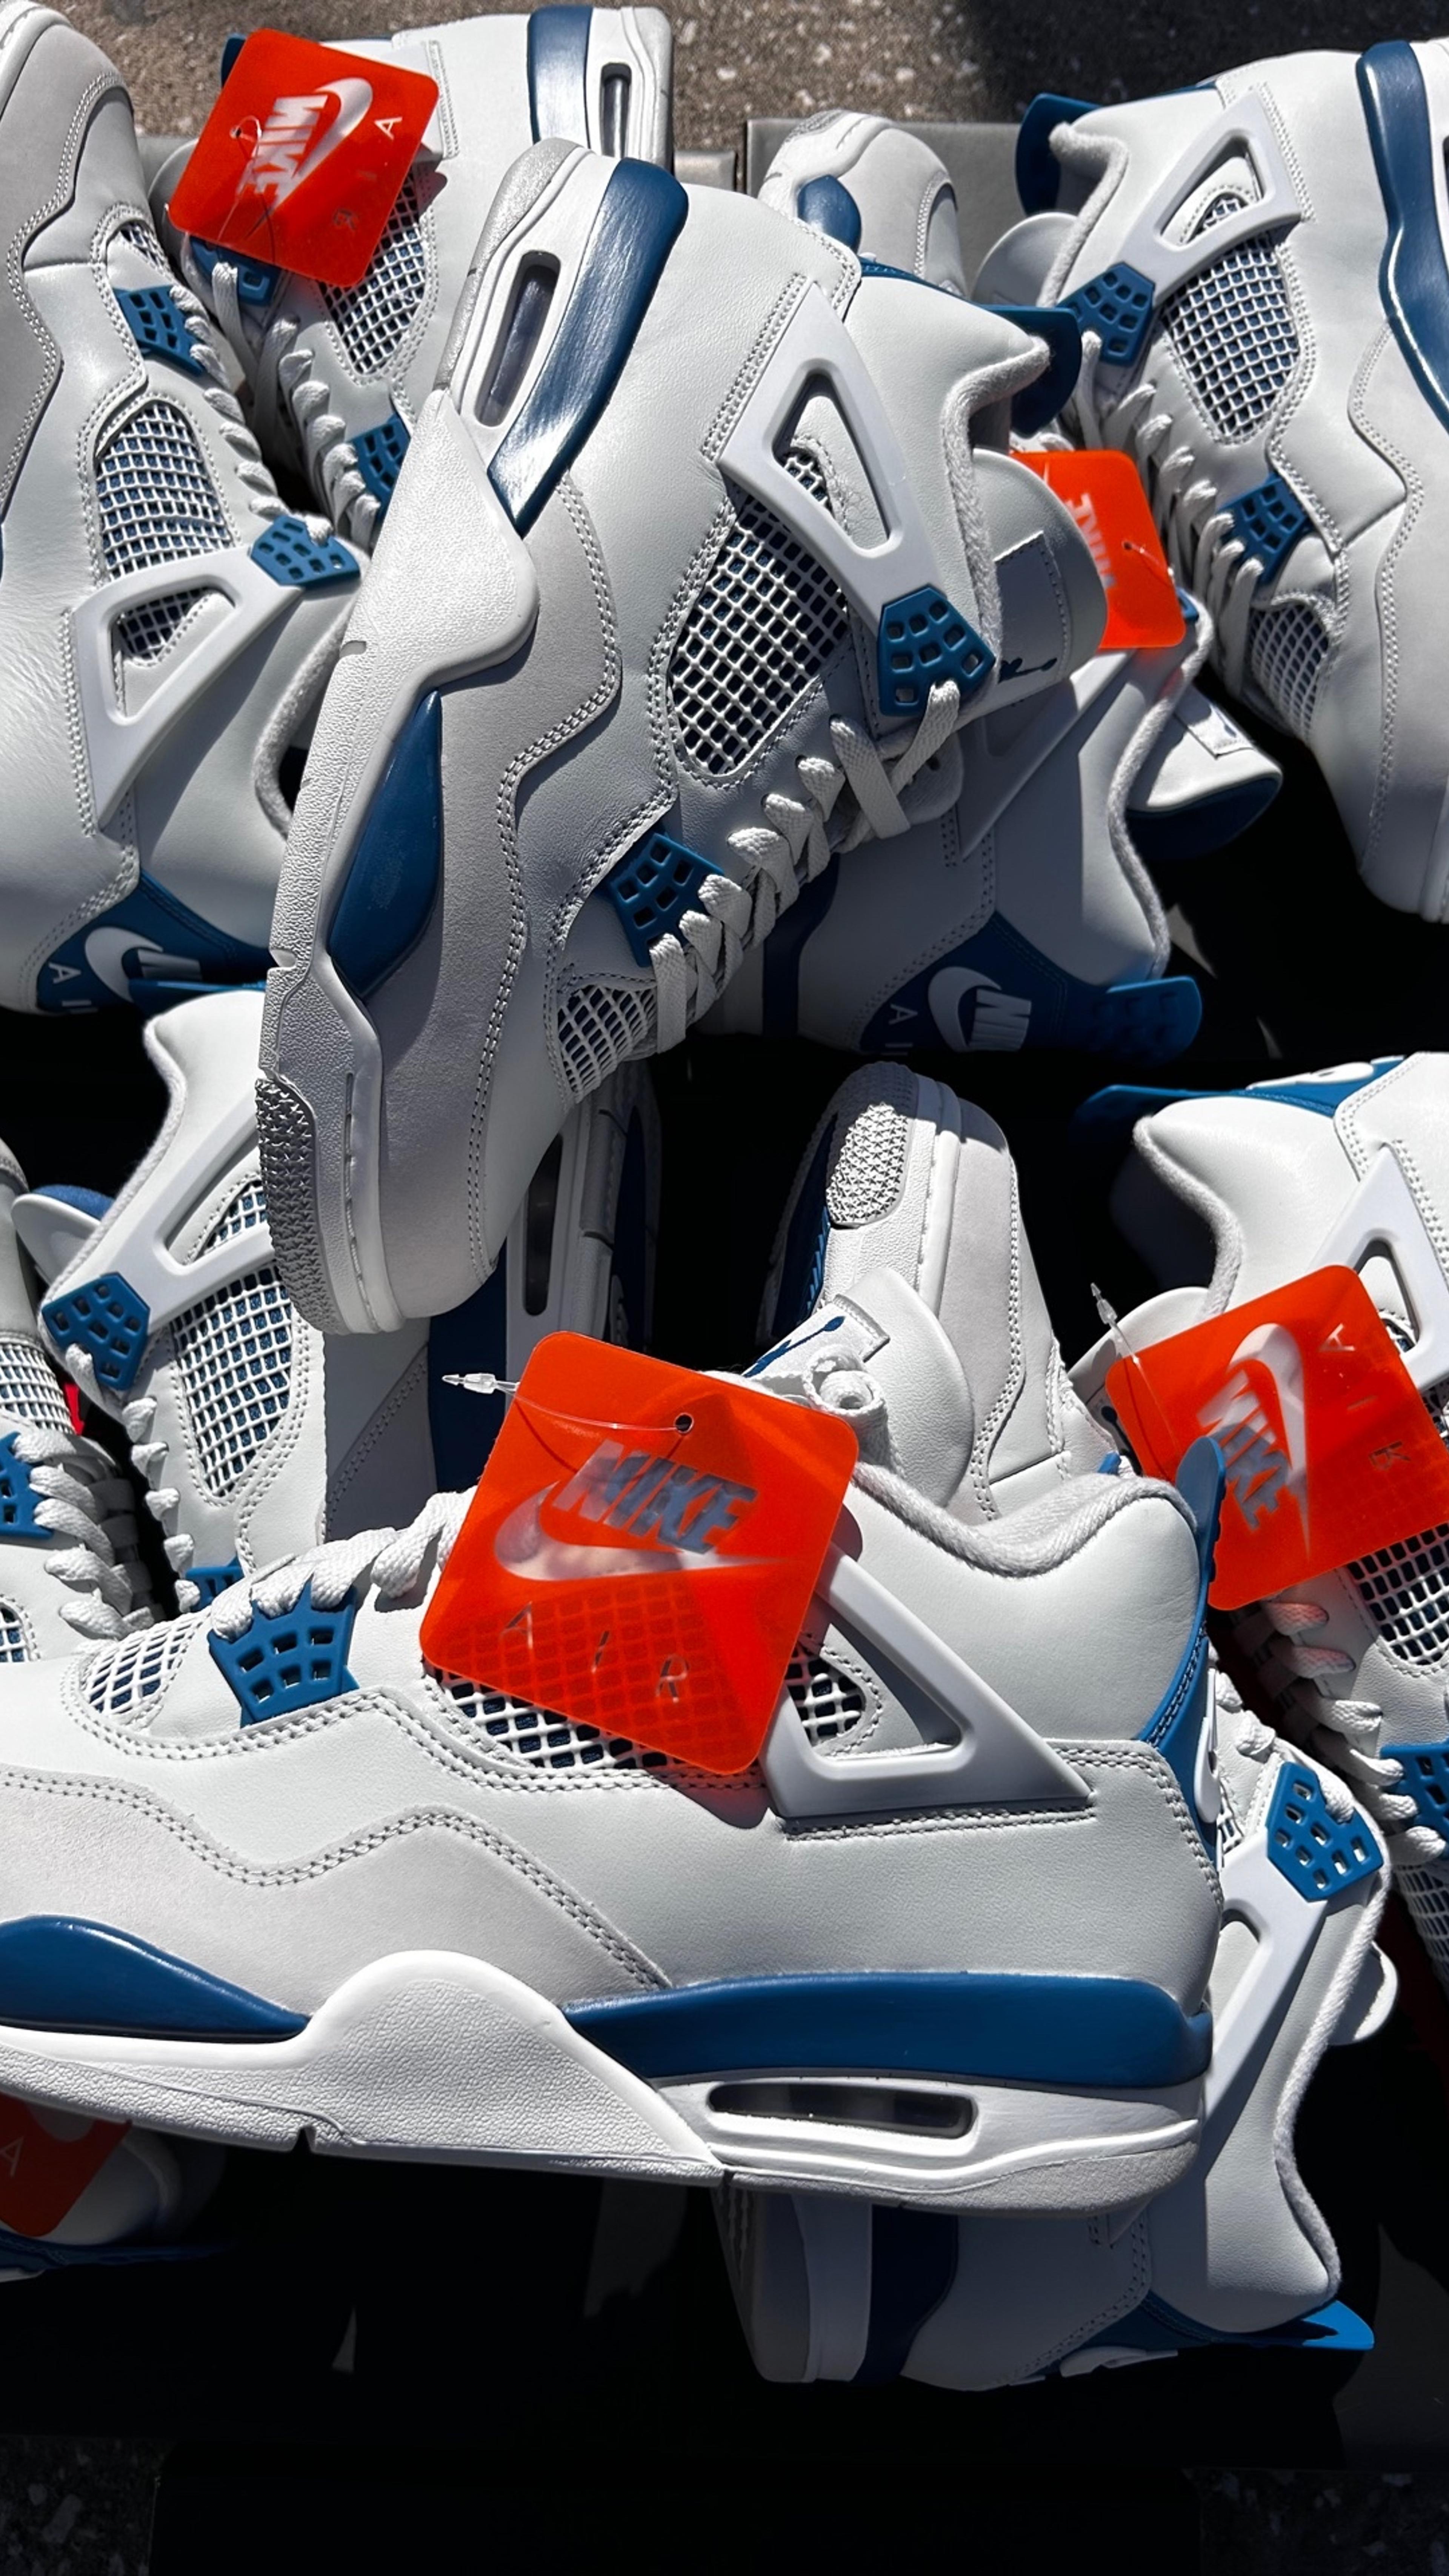 Preview image for the show titled "UNRELEASED JORDAN 4 MILITARY & MORE🫨🔥 " at Today @ 10:31 PM